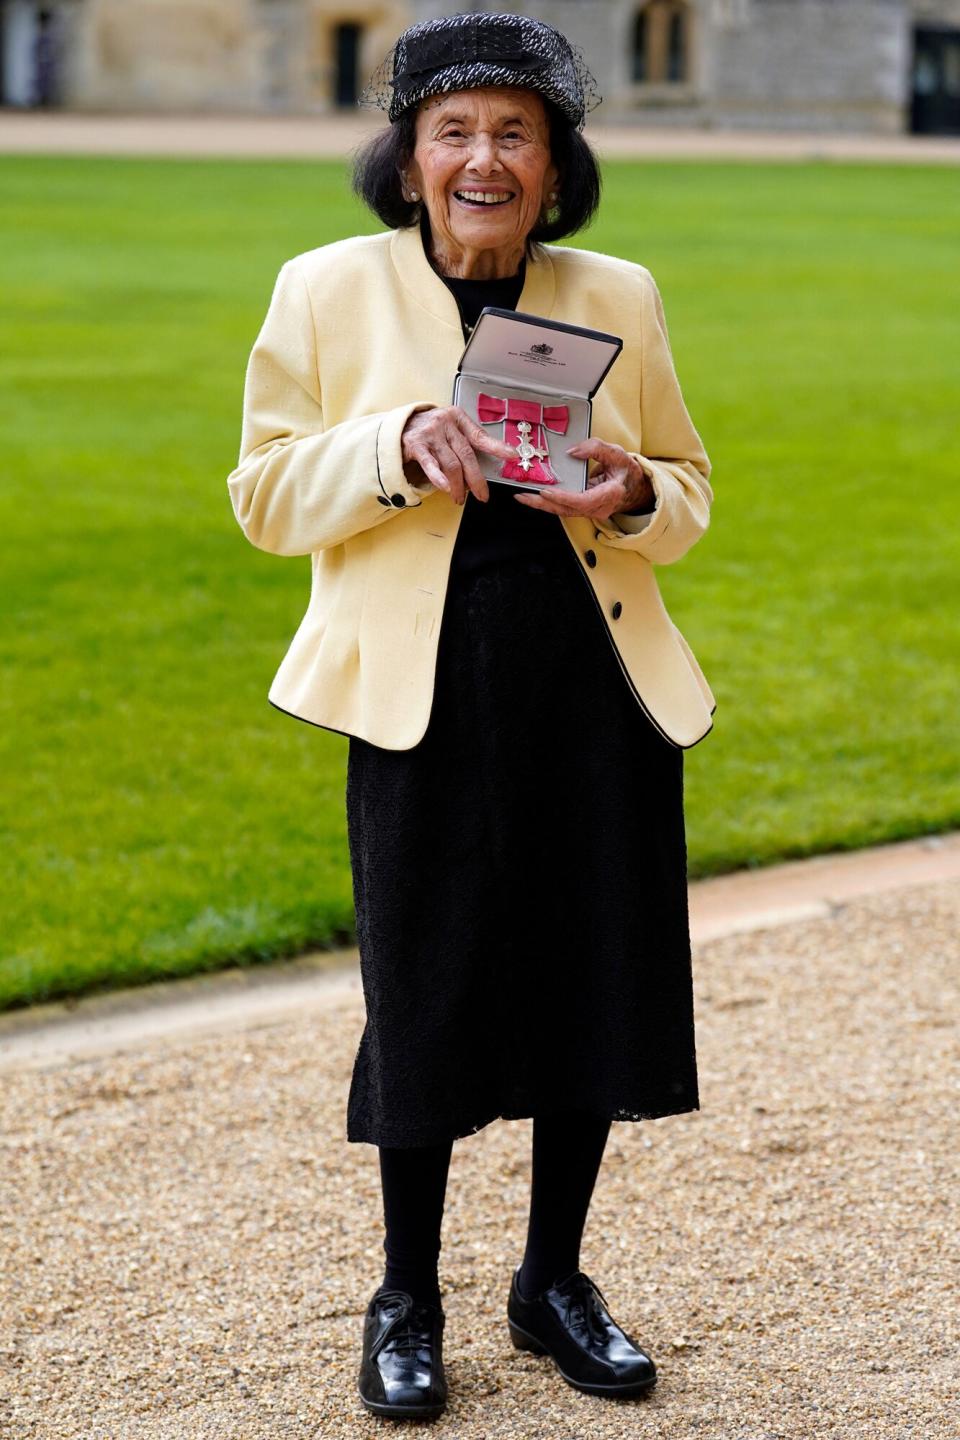 Hungarian-born Holocaust survivor Lily Ebert poses with her medal after being appointed a Member of the Order of the British Empire (MBE) following an investiture ceremony at Windsor Castle, on January 31, 2023.